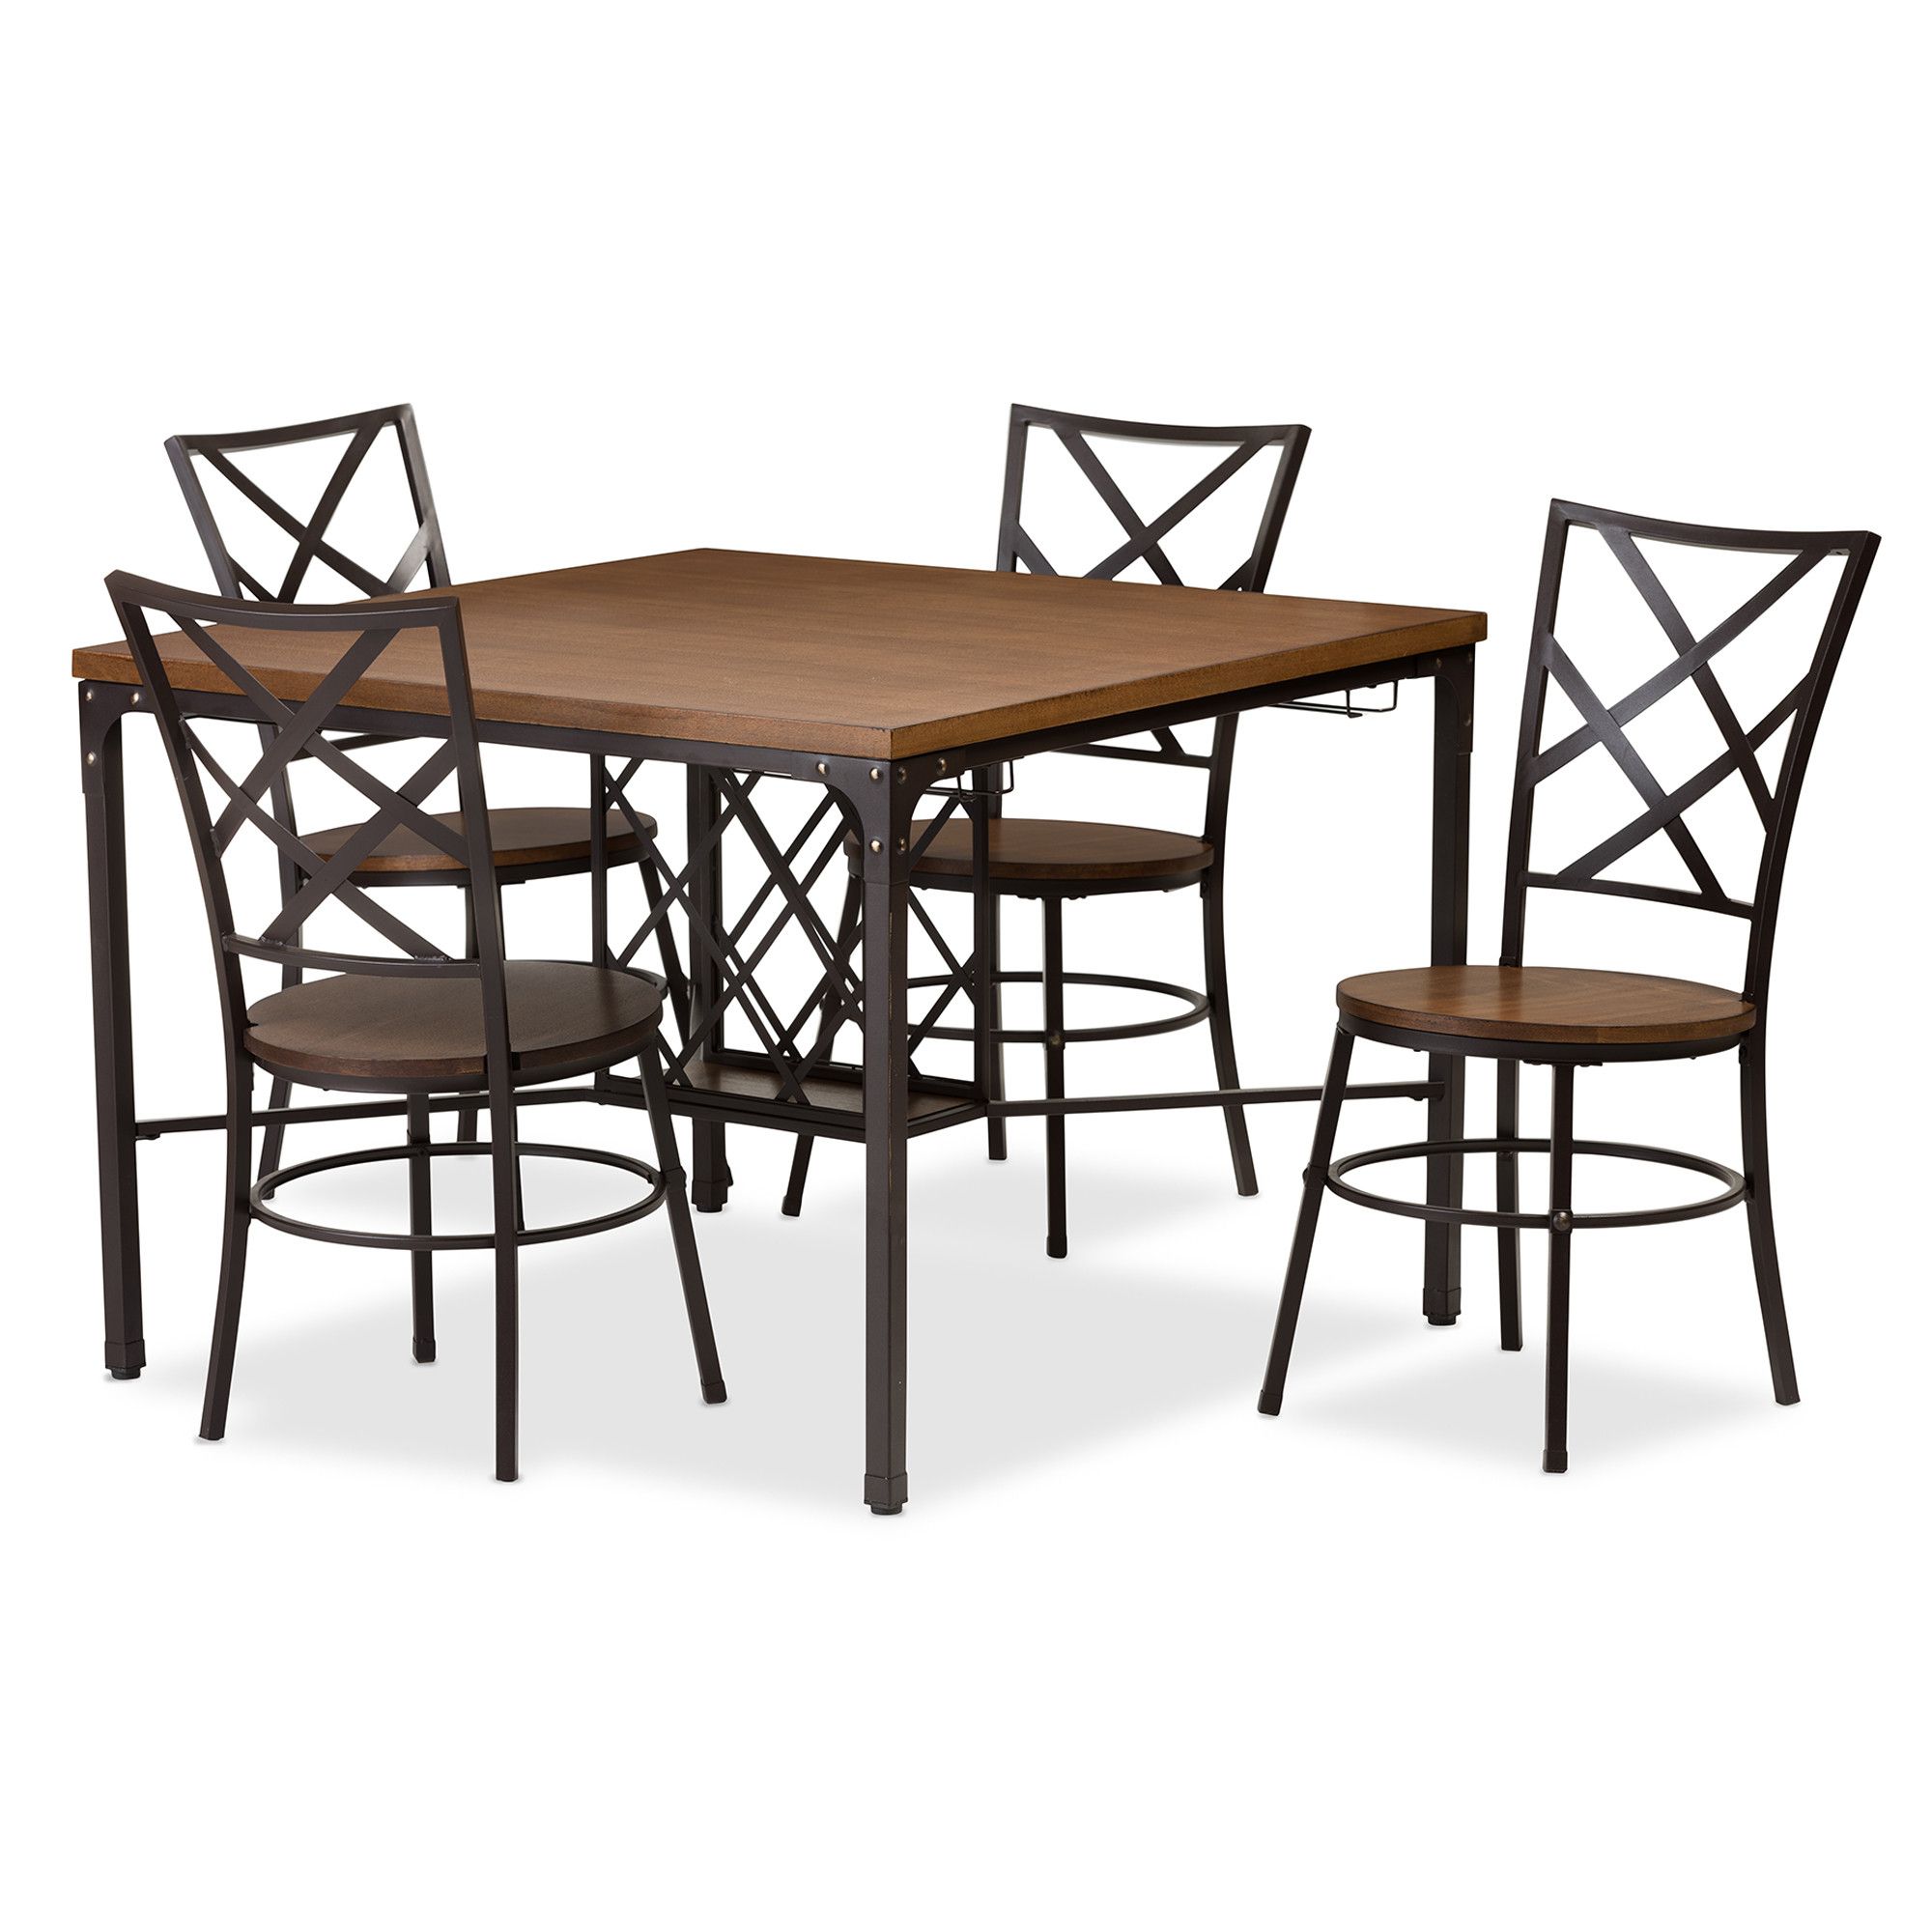 2018 Wholesale Dining Sets. Room Pier One (View 9 of 20)